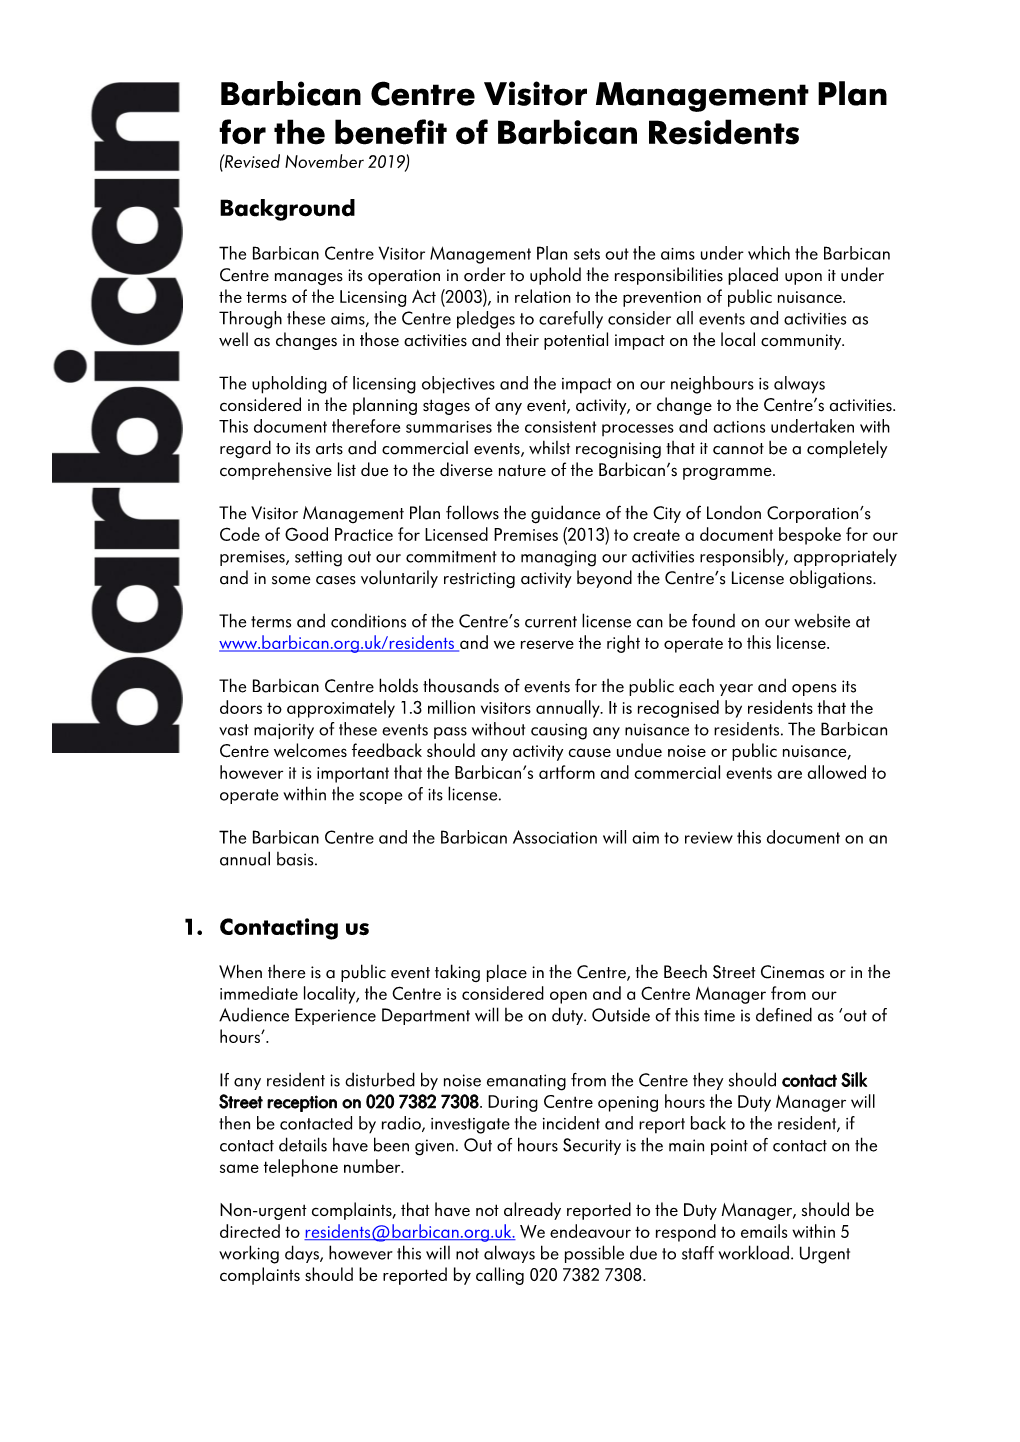 Barbican Centre Visitor Management Plan for the Benefit of Barbican Residents (Revised November 2019)